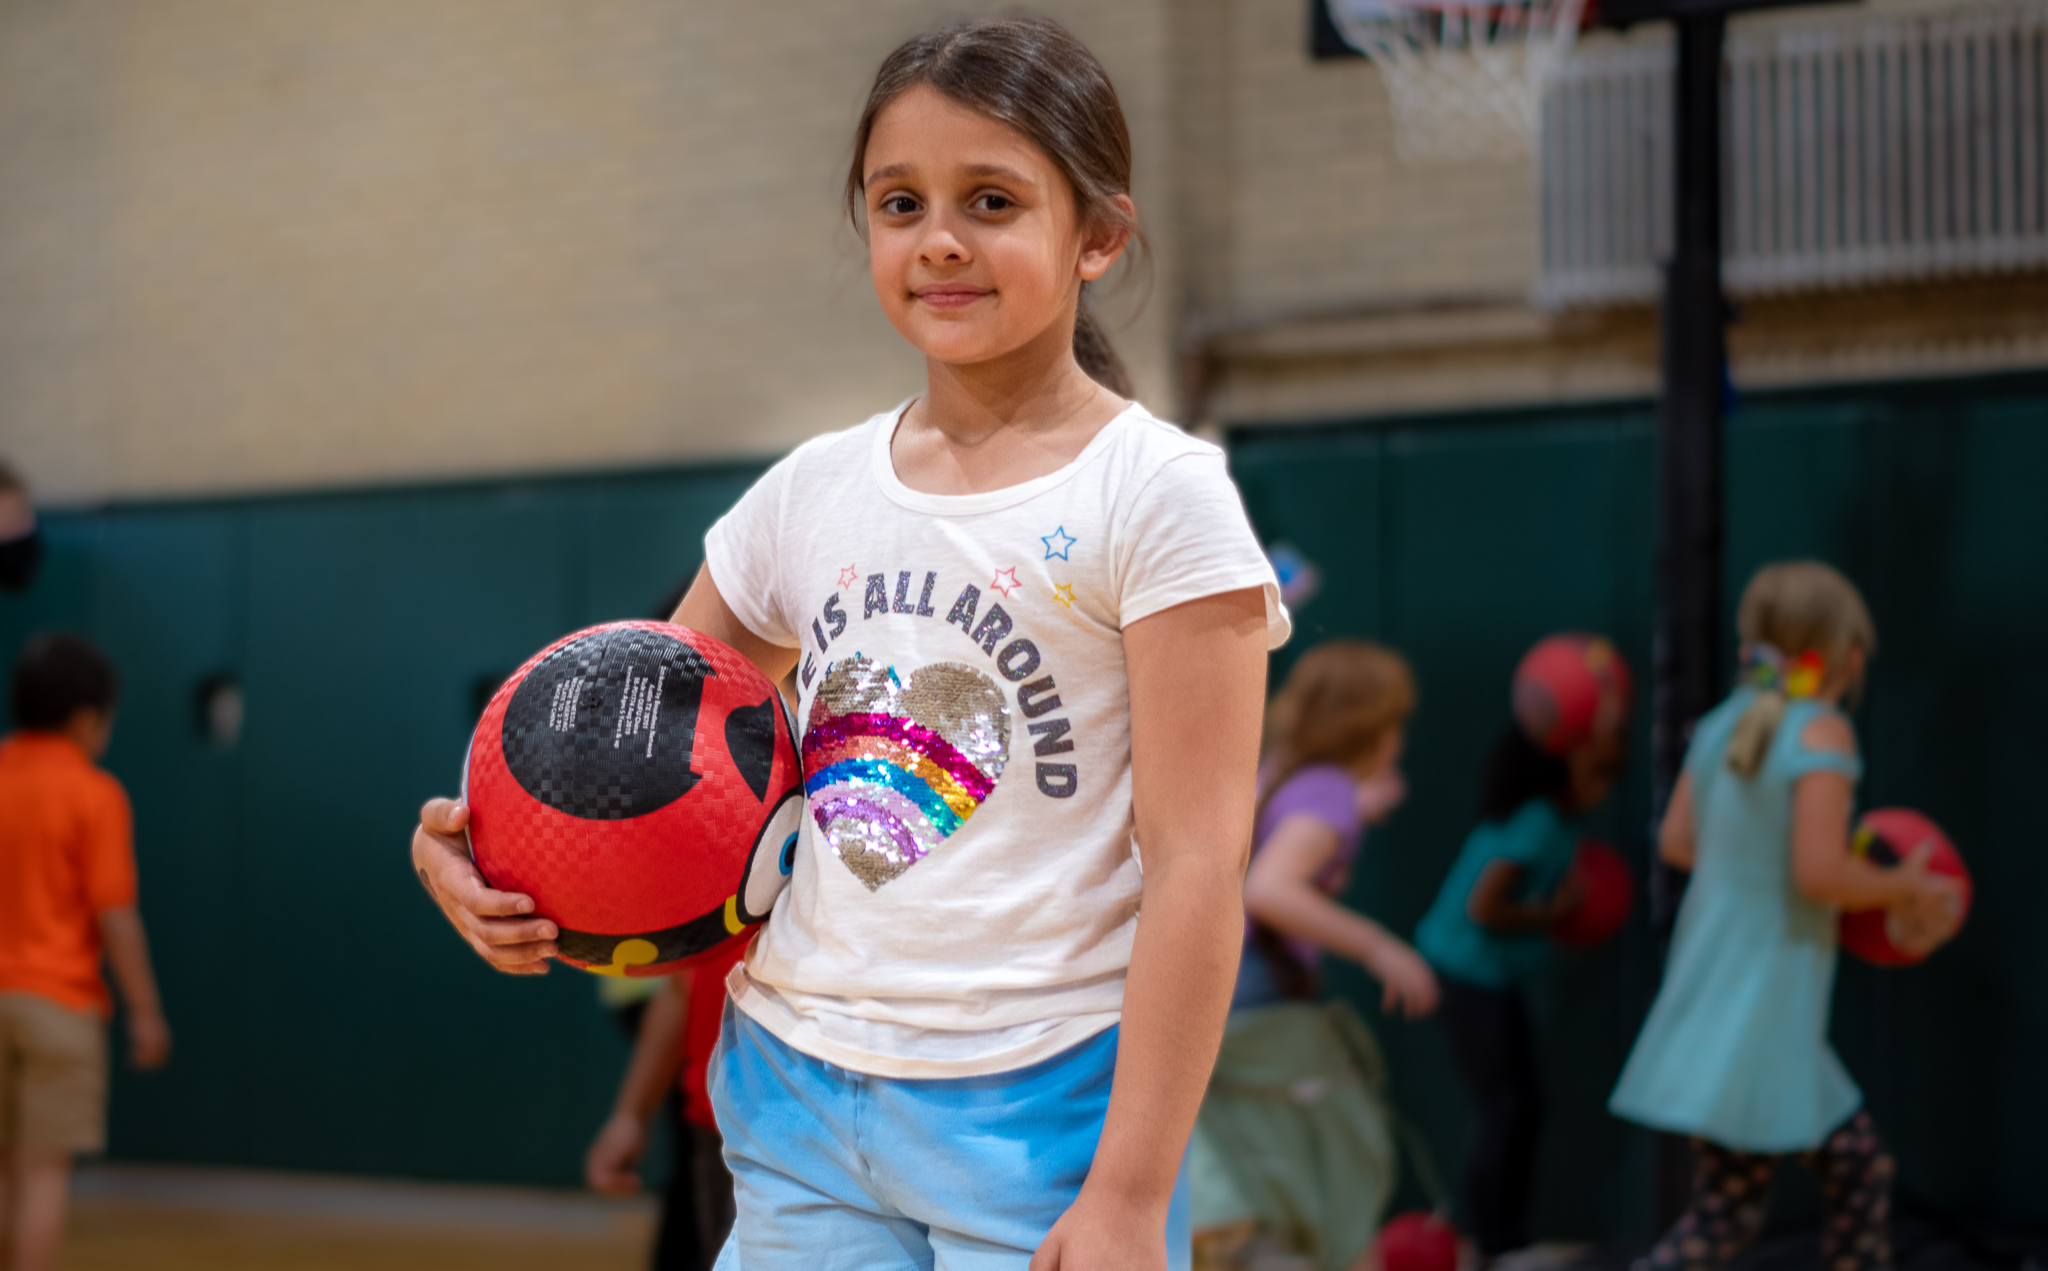 Student in gym class smiling as they hold a sports ball, as other students in the background play. 